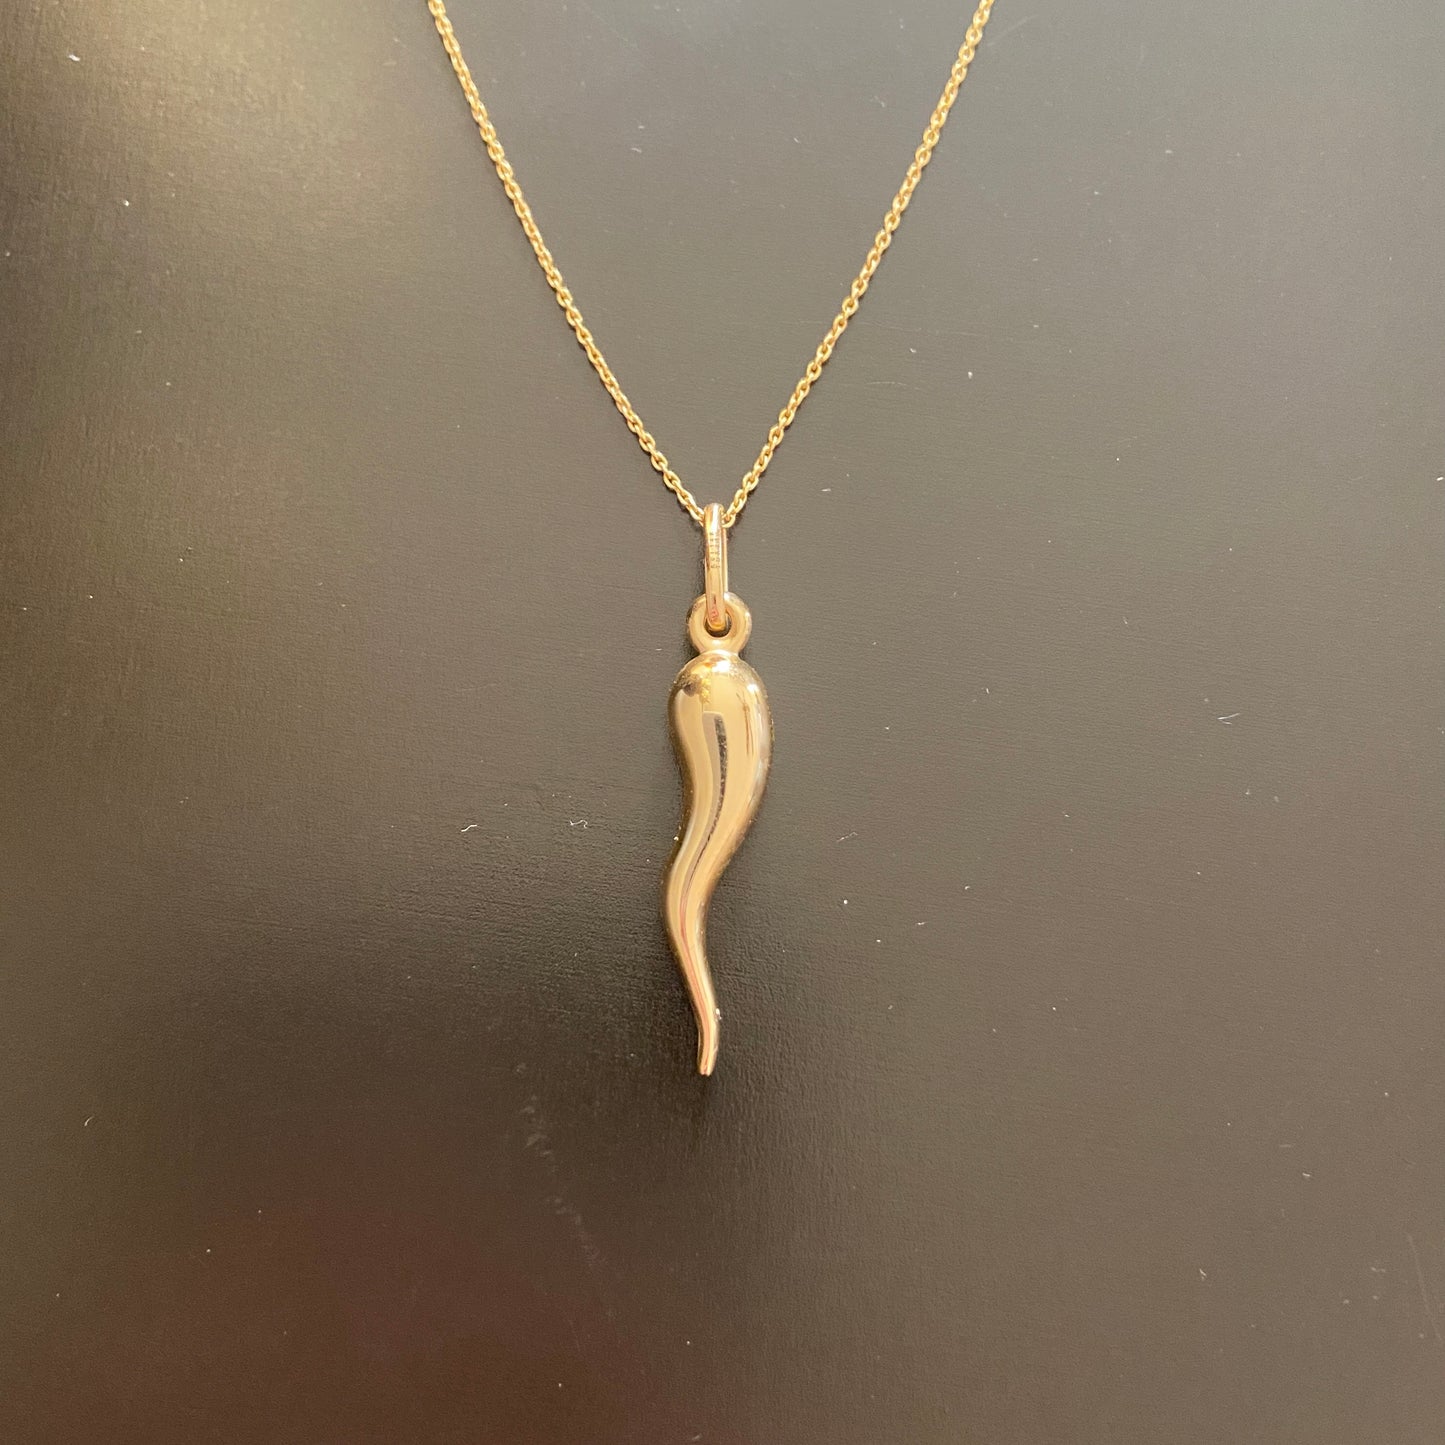 Solid Real 14k Gold Italian Horn and Chain Set